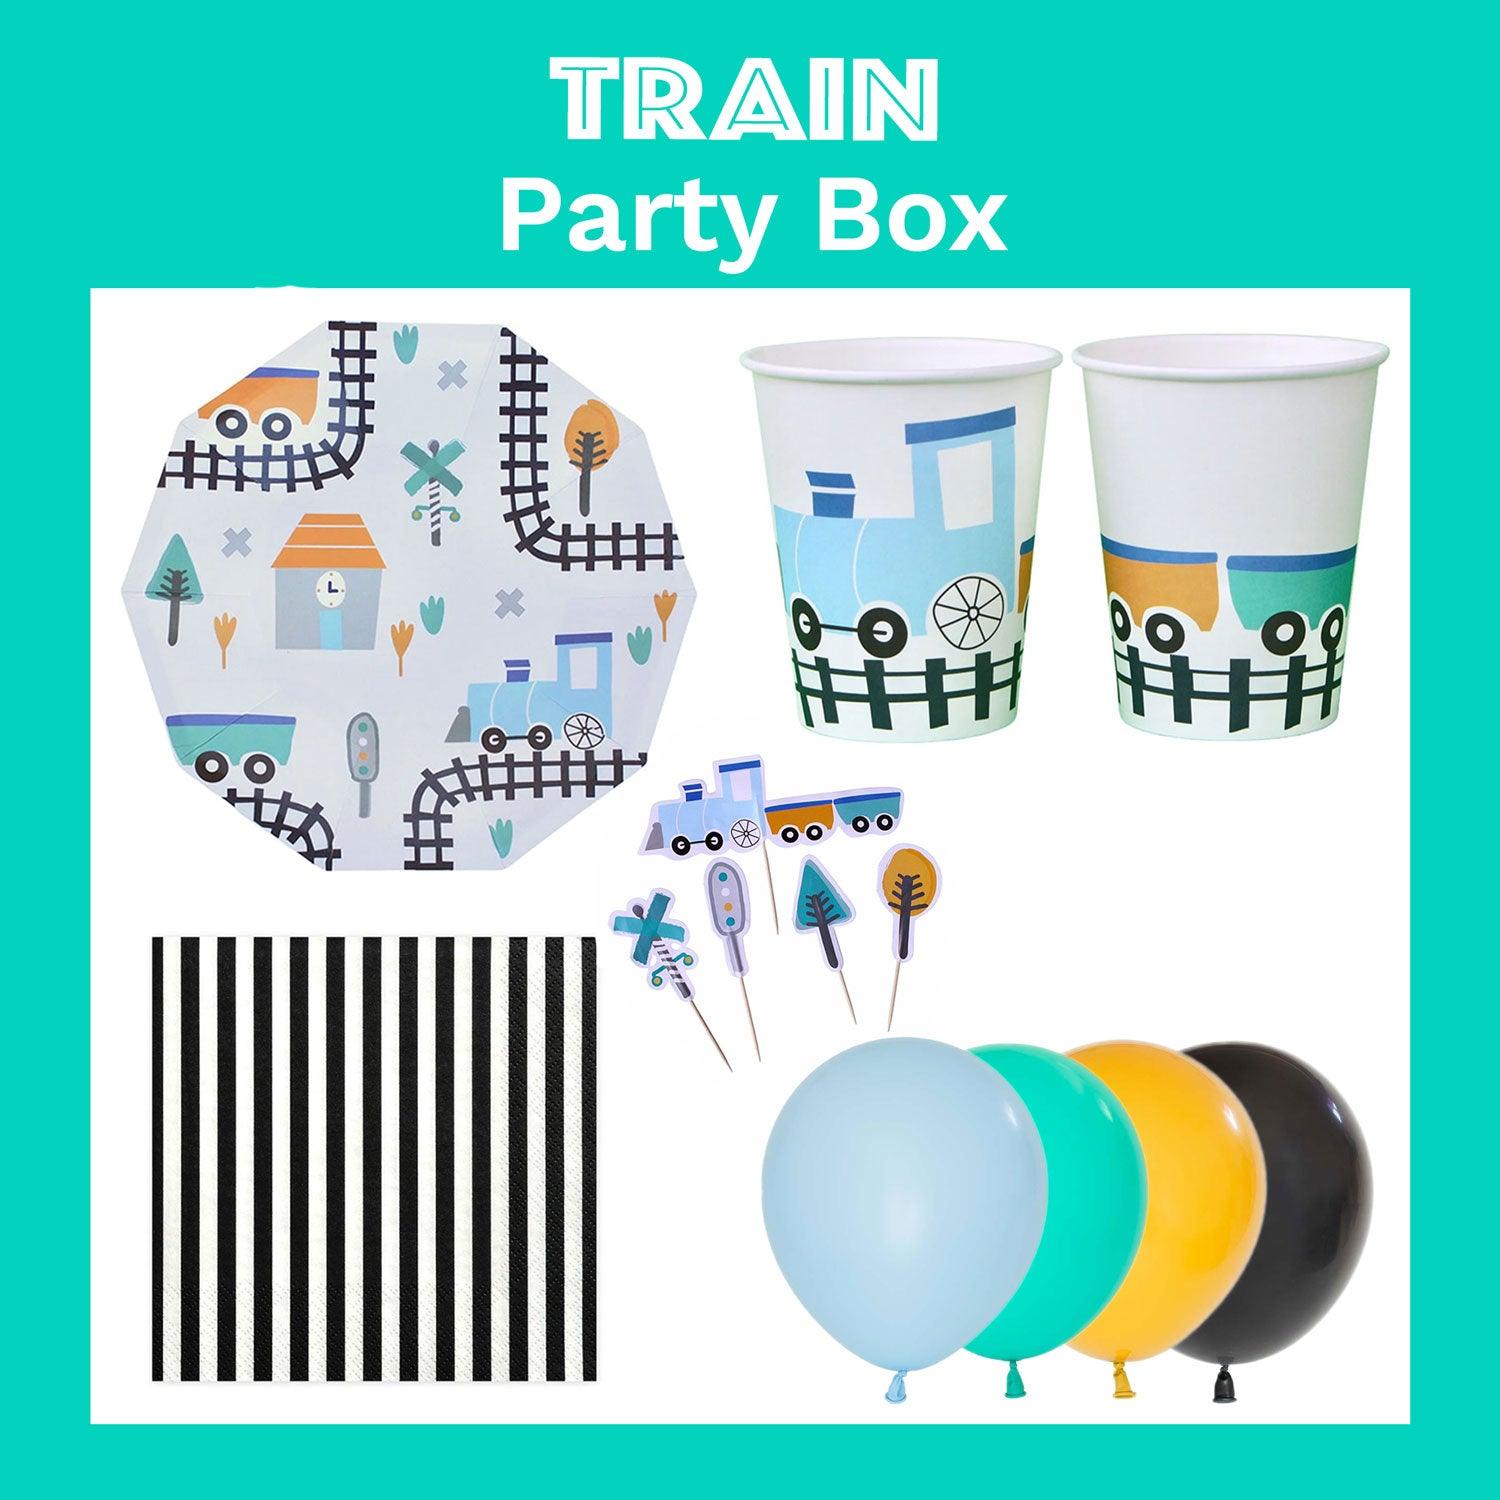 Train Party Box - The Party Room